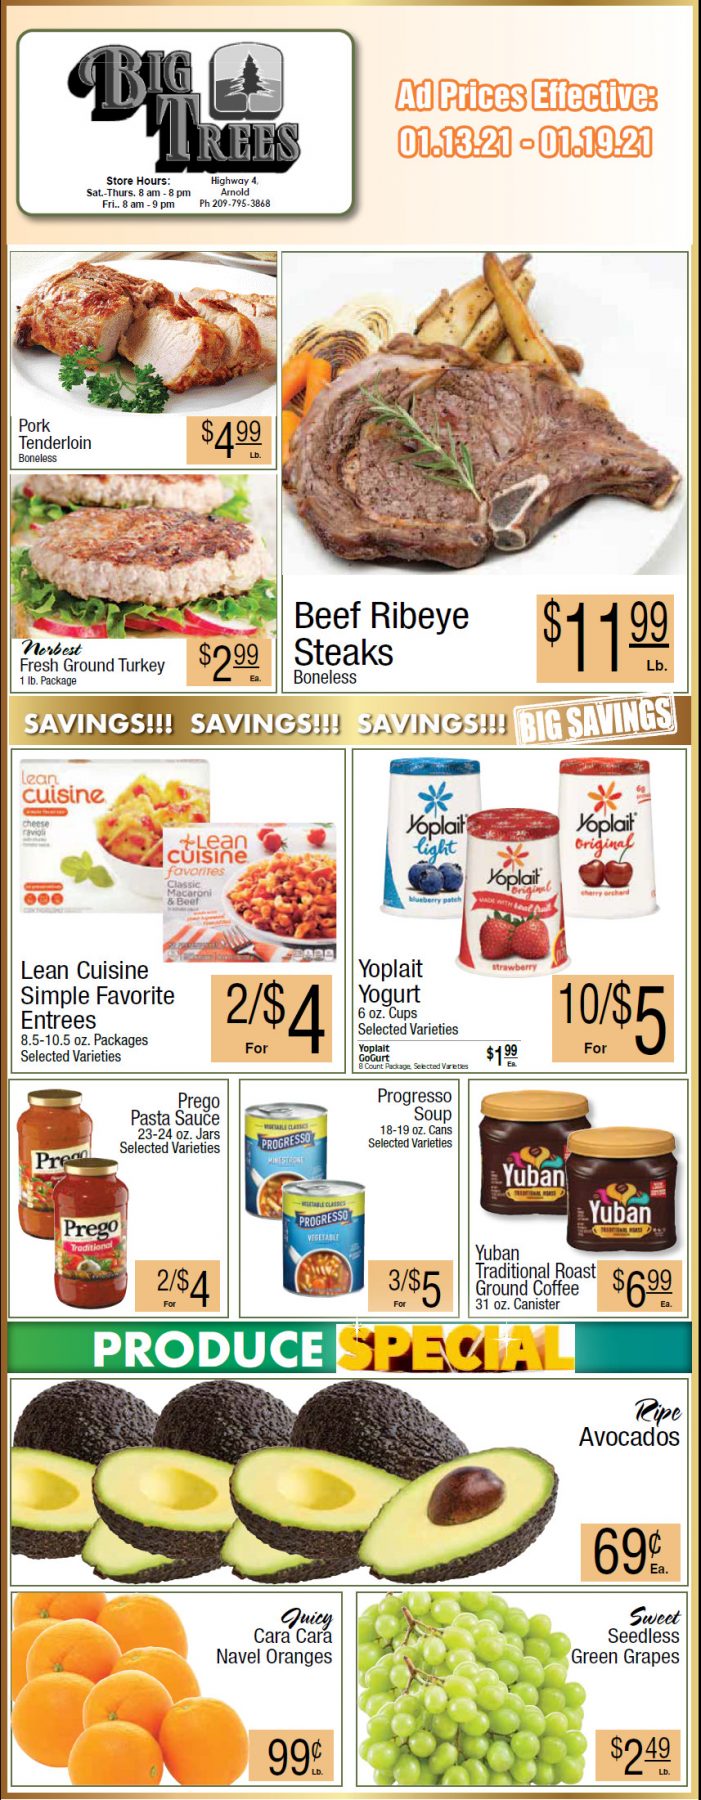 Big Trees Market Weekly Ad & Grocery Specials Through January 19th